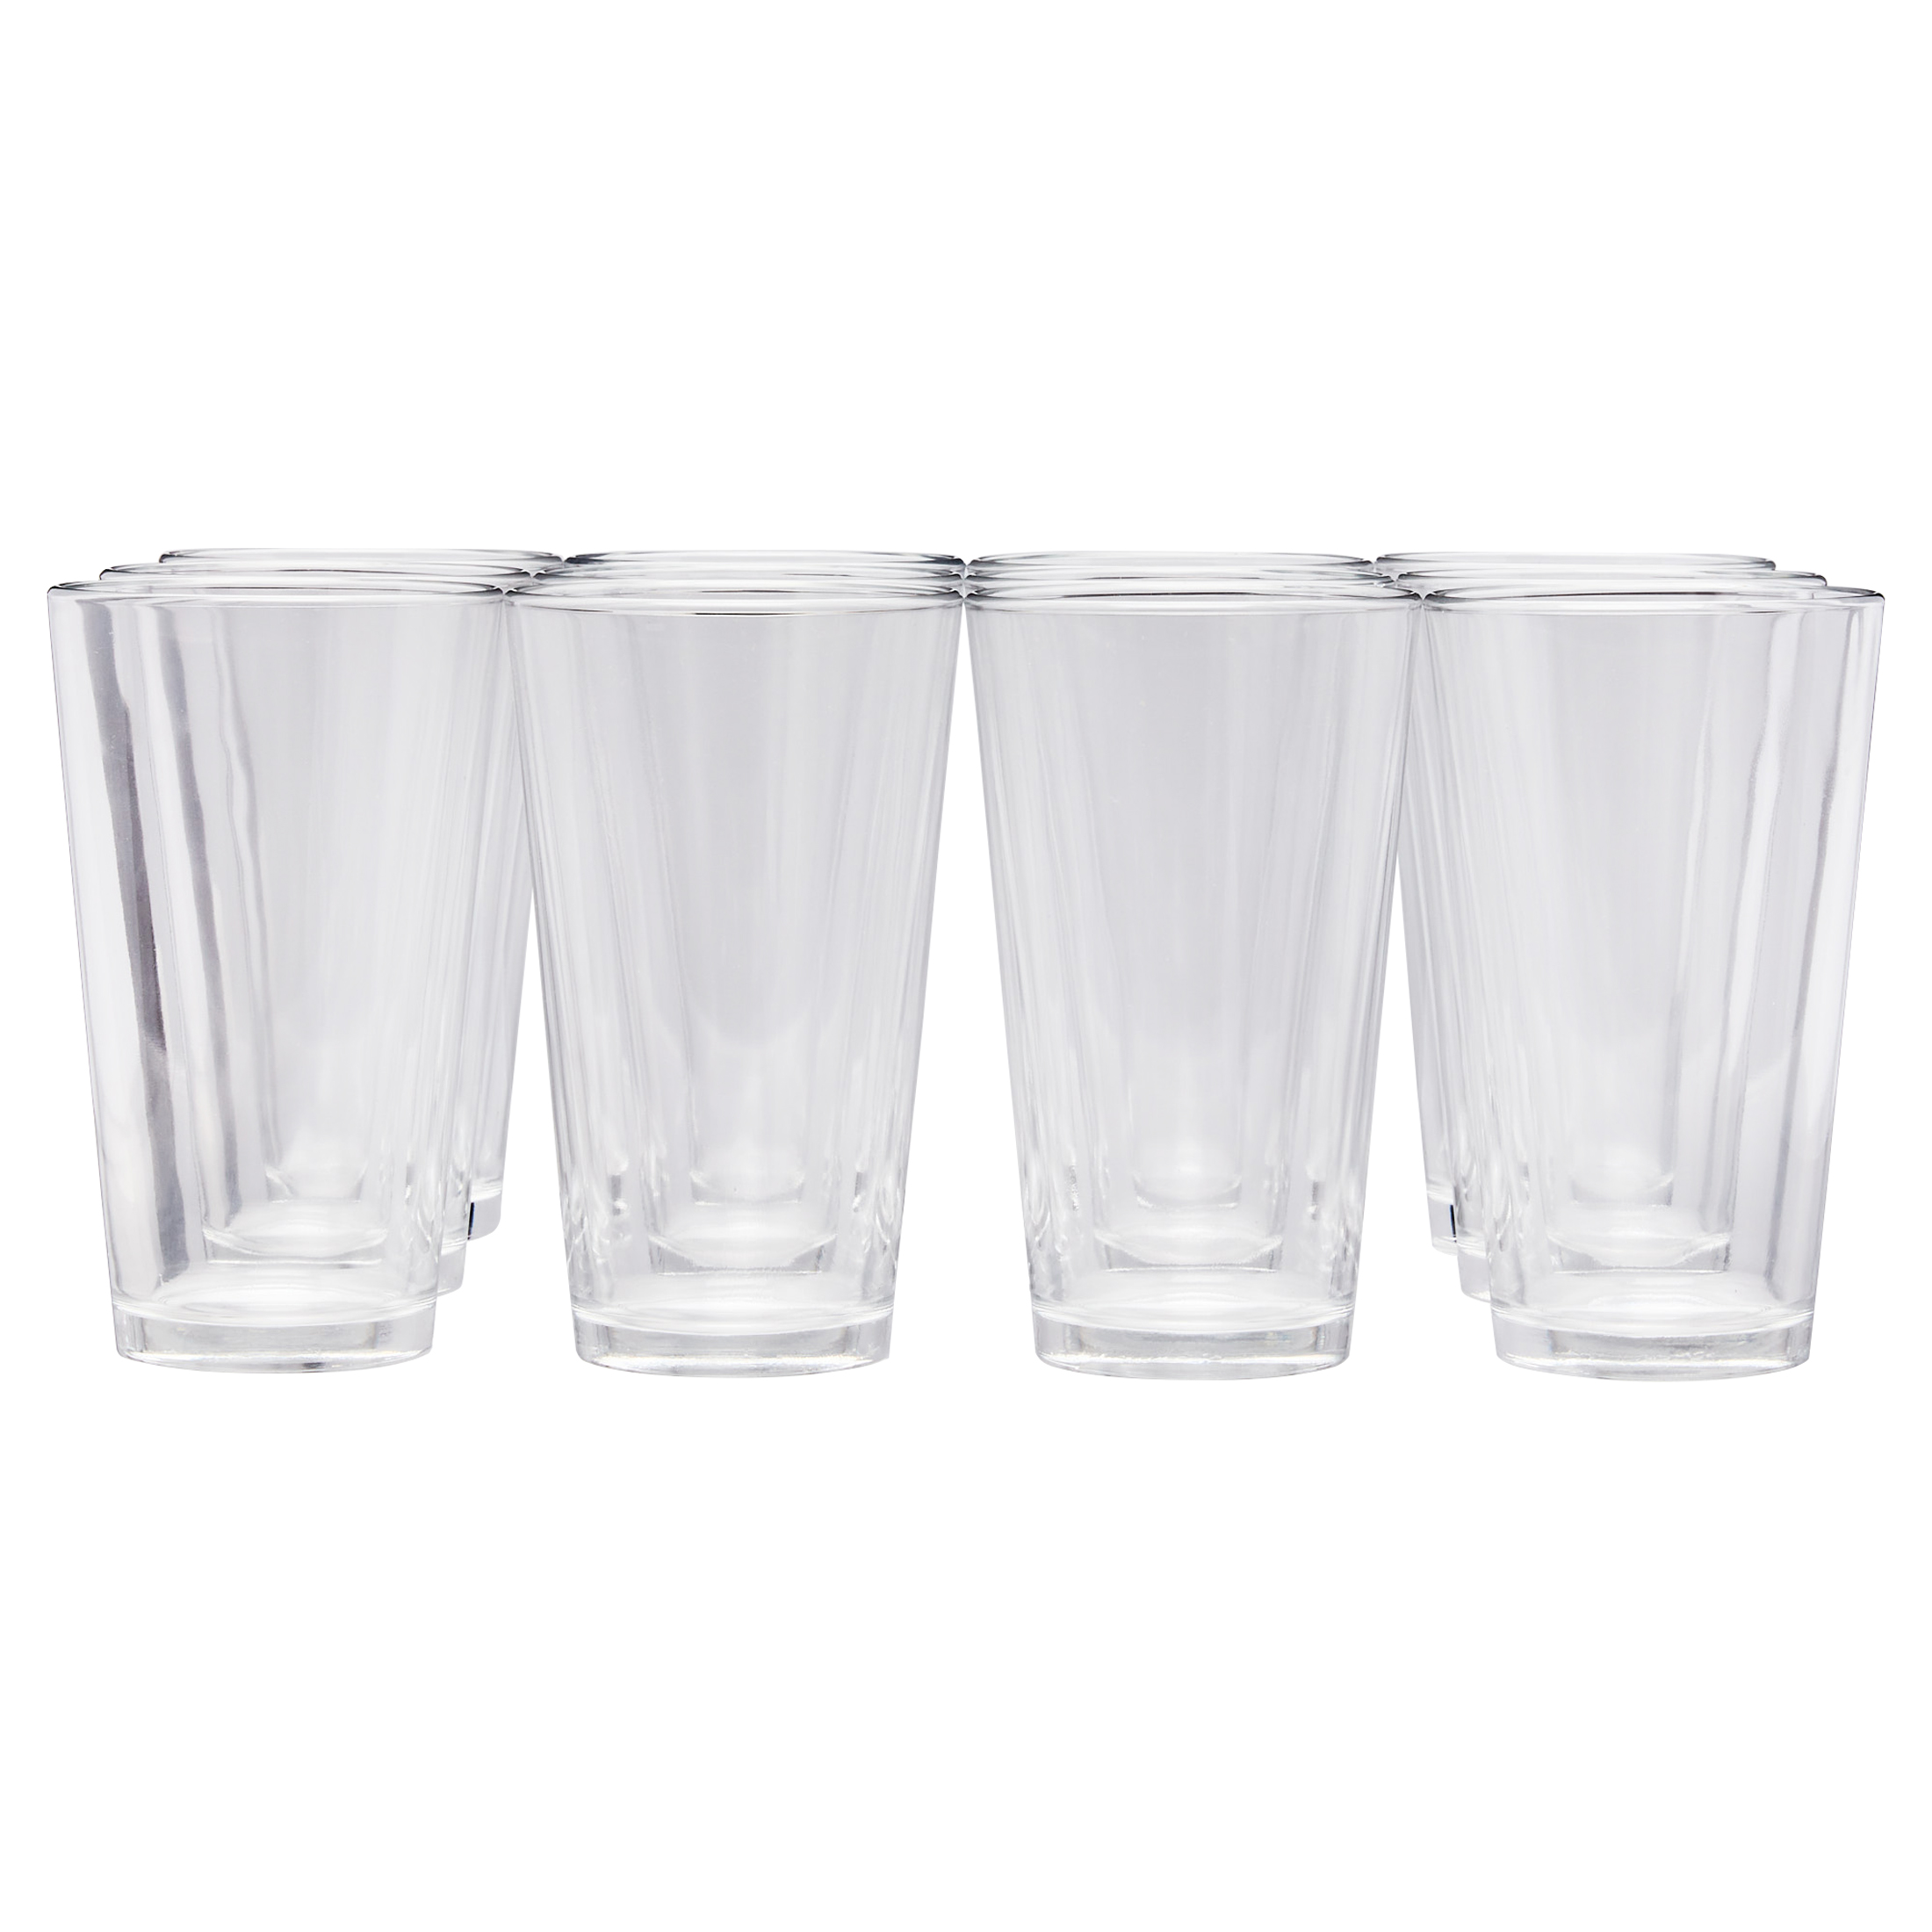 Luminarc 16 oz. Clear Glass Coolers 12 PC Set - image 5 of 6